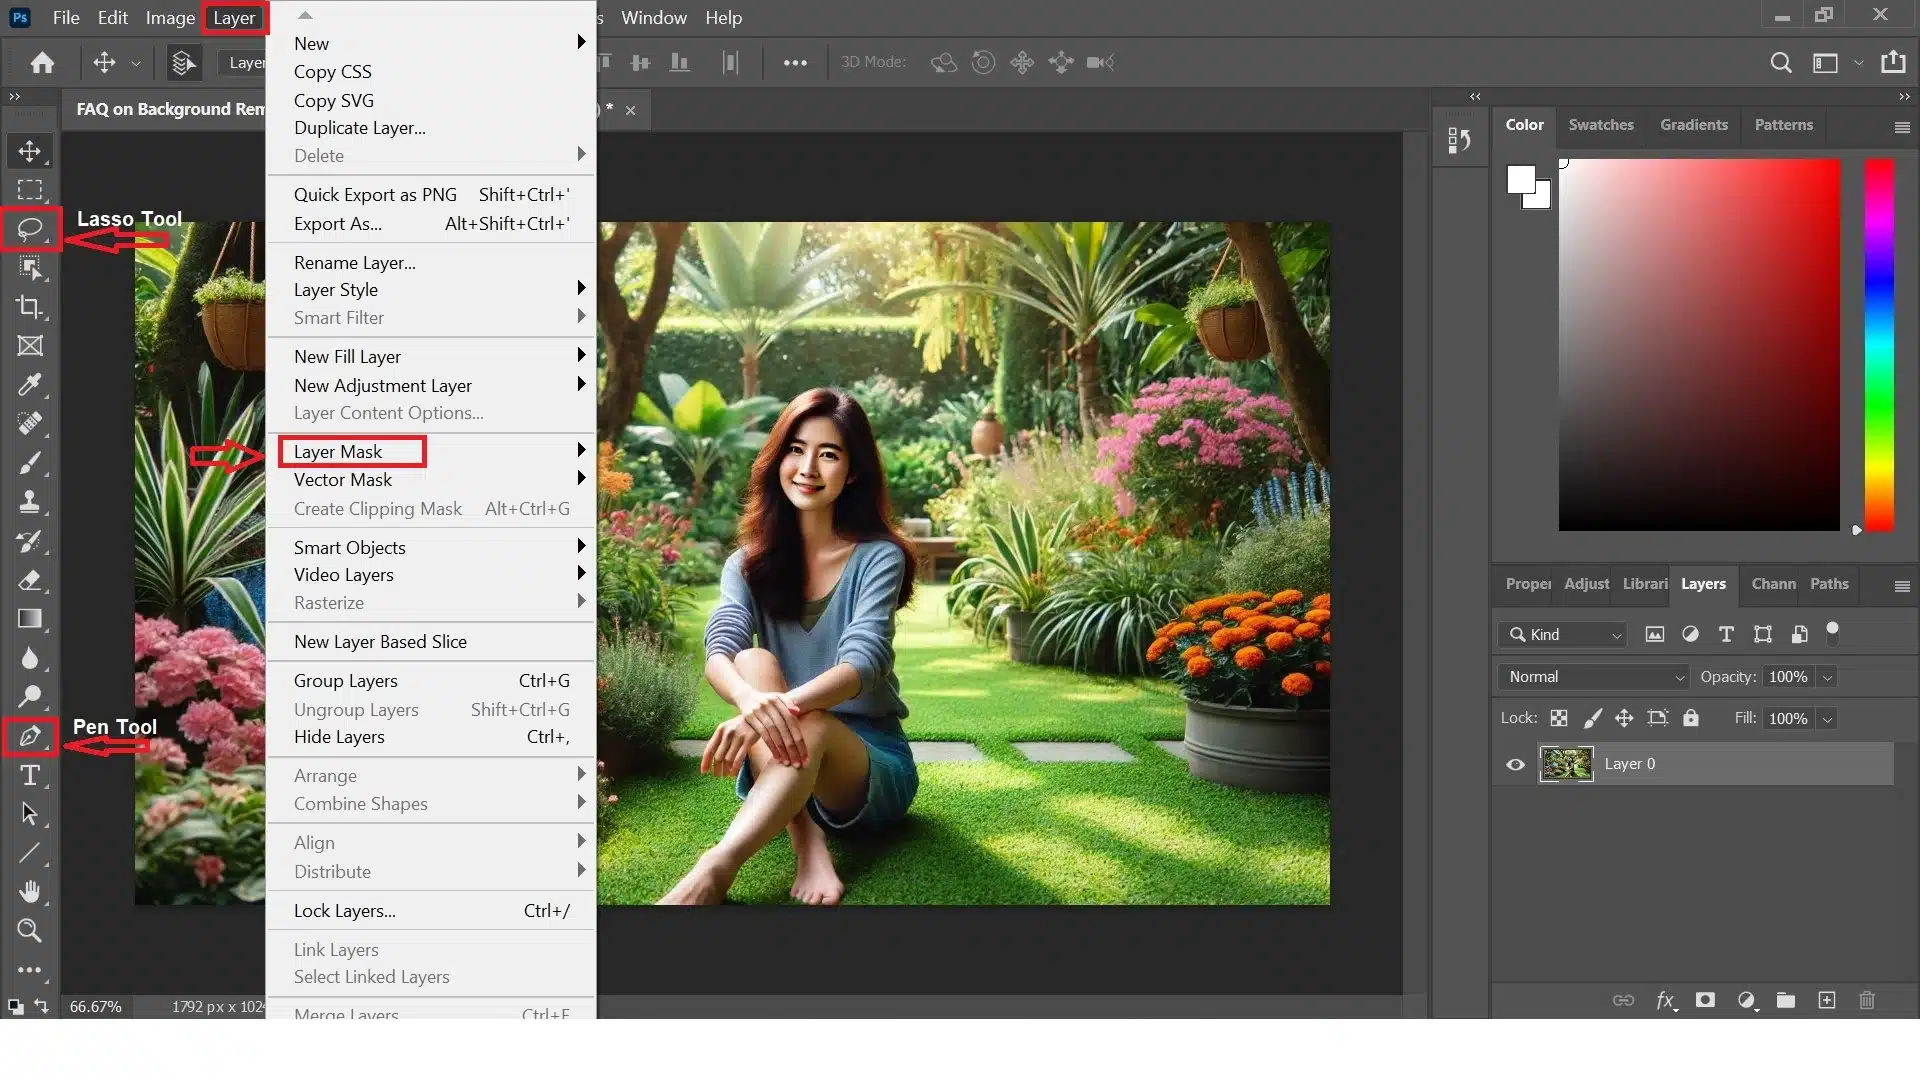 Adobe Photoshop interface showing the process of using a layer mask. The menu is open with the 'Layer Mask' option highlighted, and a woman sitting in a garden is visible in the workspace also pen and lasso tool for background removal. This image depicts How to Remove Background in Photoshop.